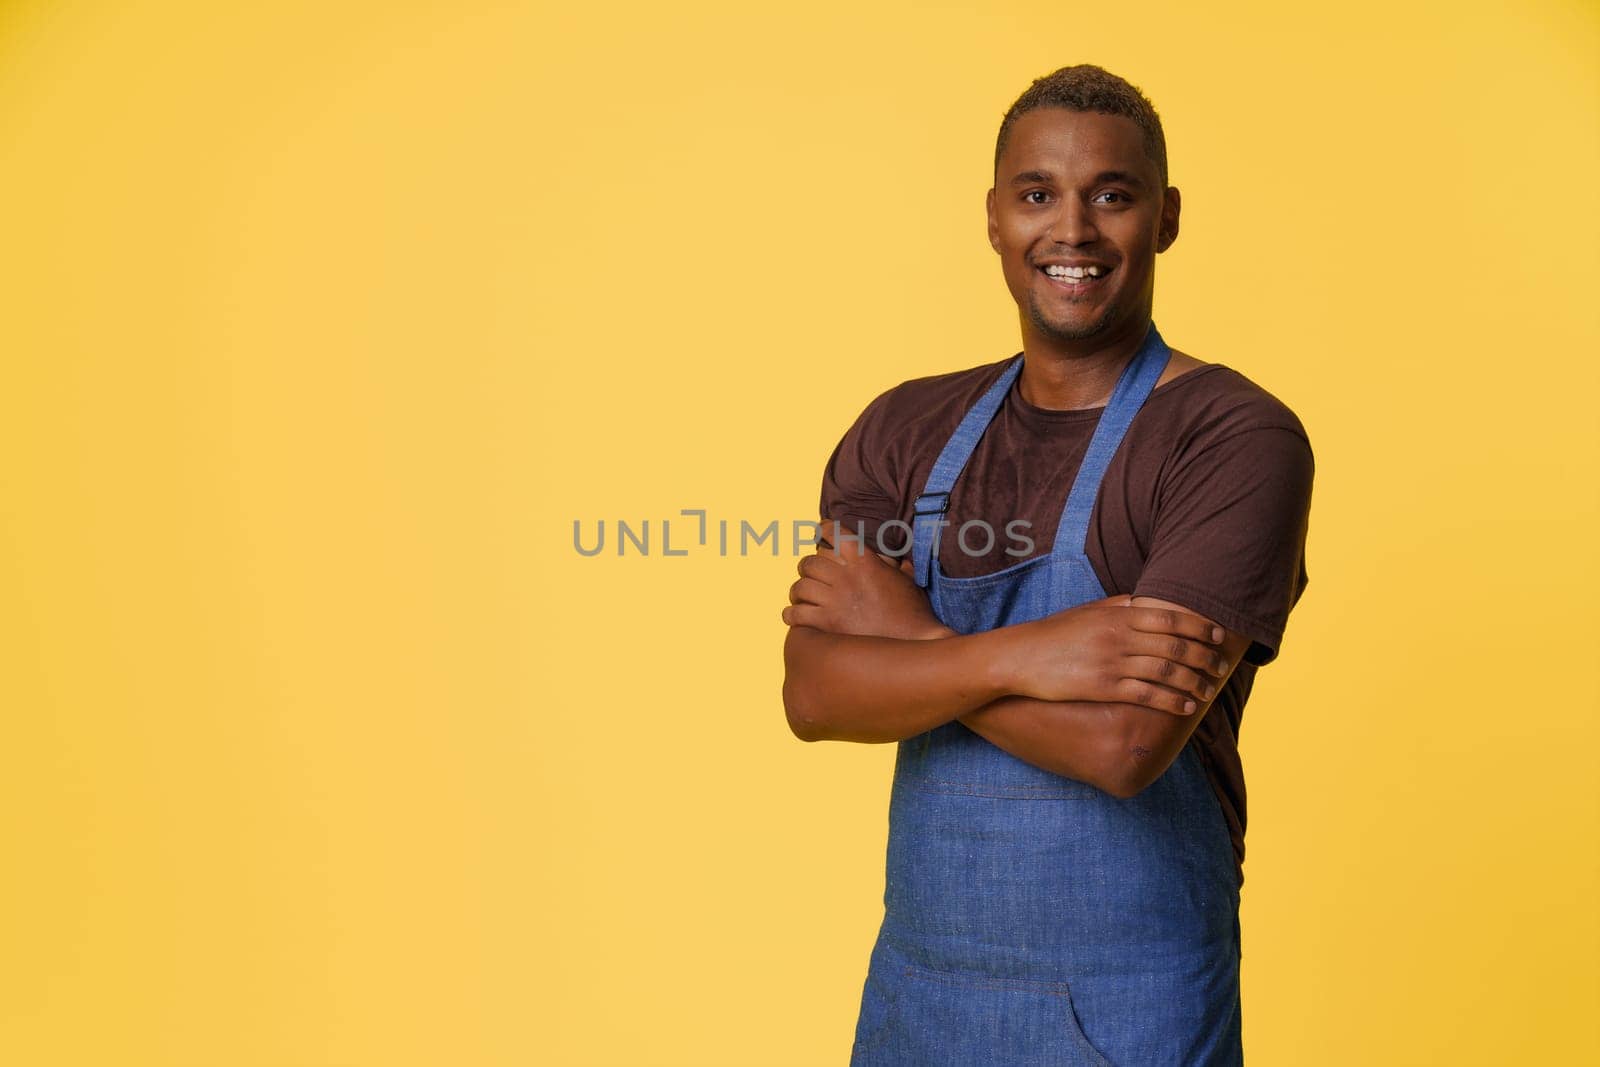 Cheerful African American cook wearing blue apron smiles in front of yellow background with copy space, suggesting concept of professional cook or chef in culinary or kitchen-related profession. by LipikStockMedia